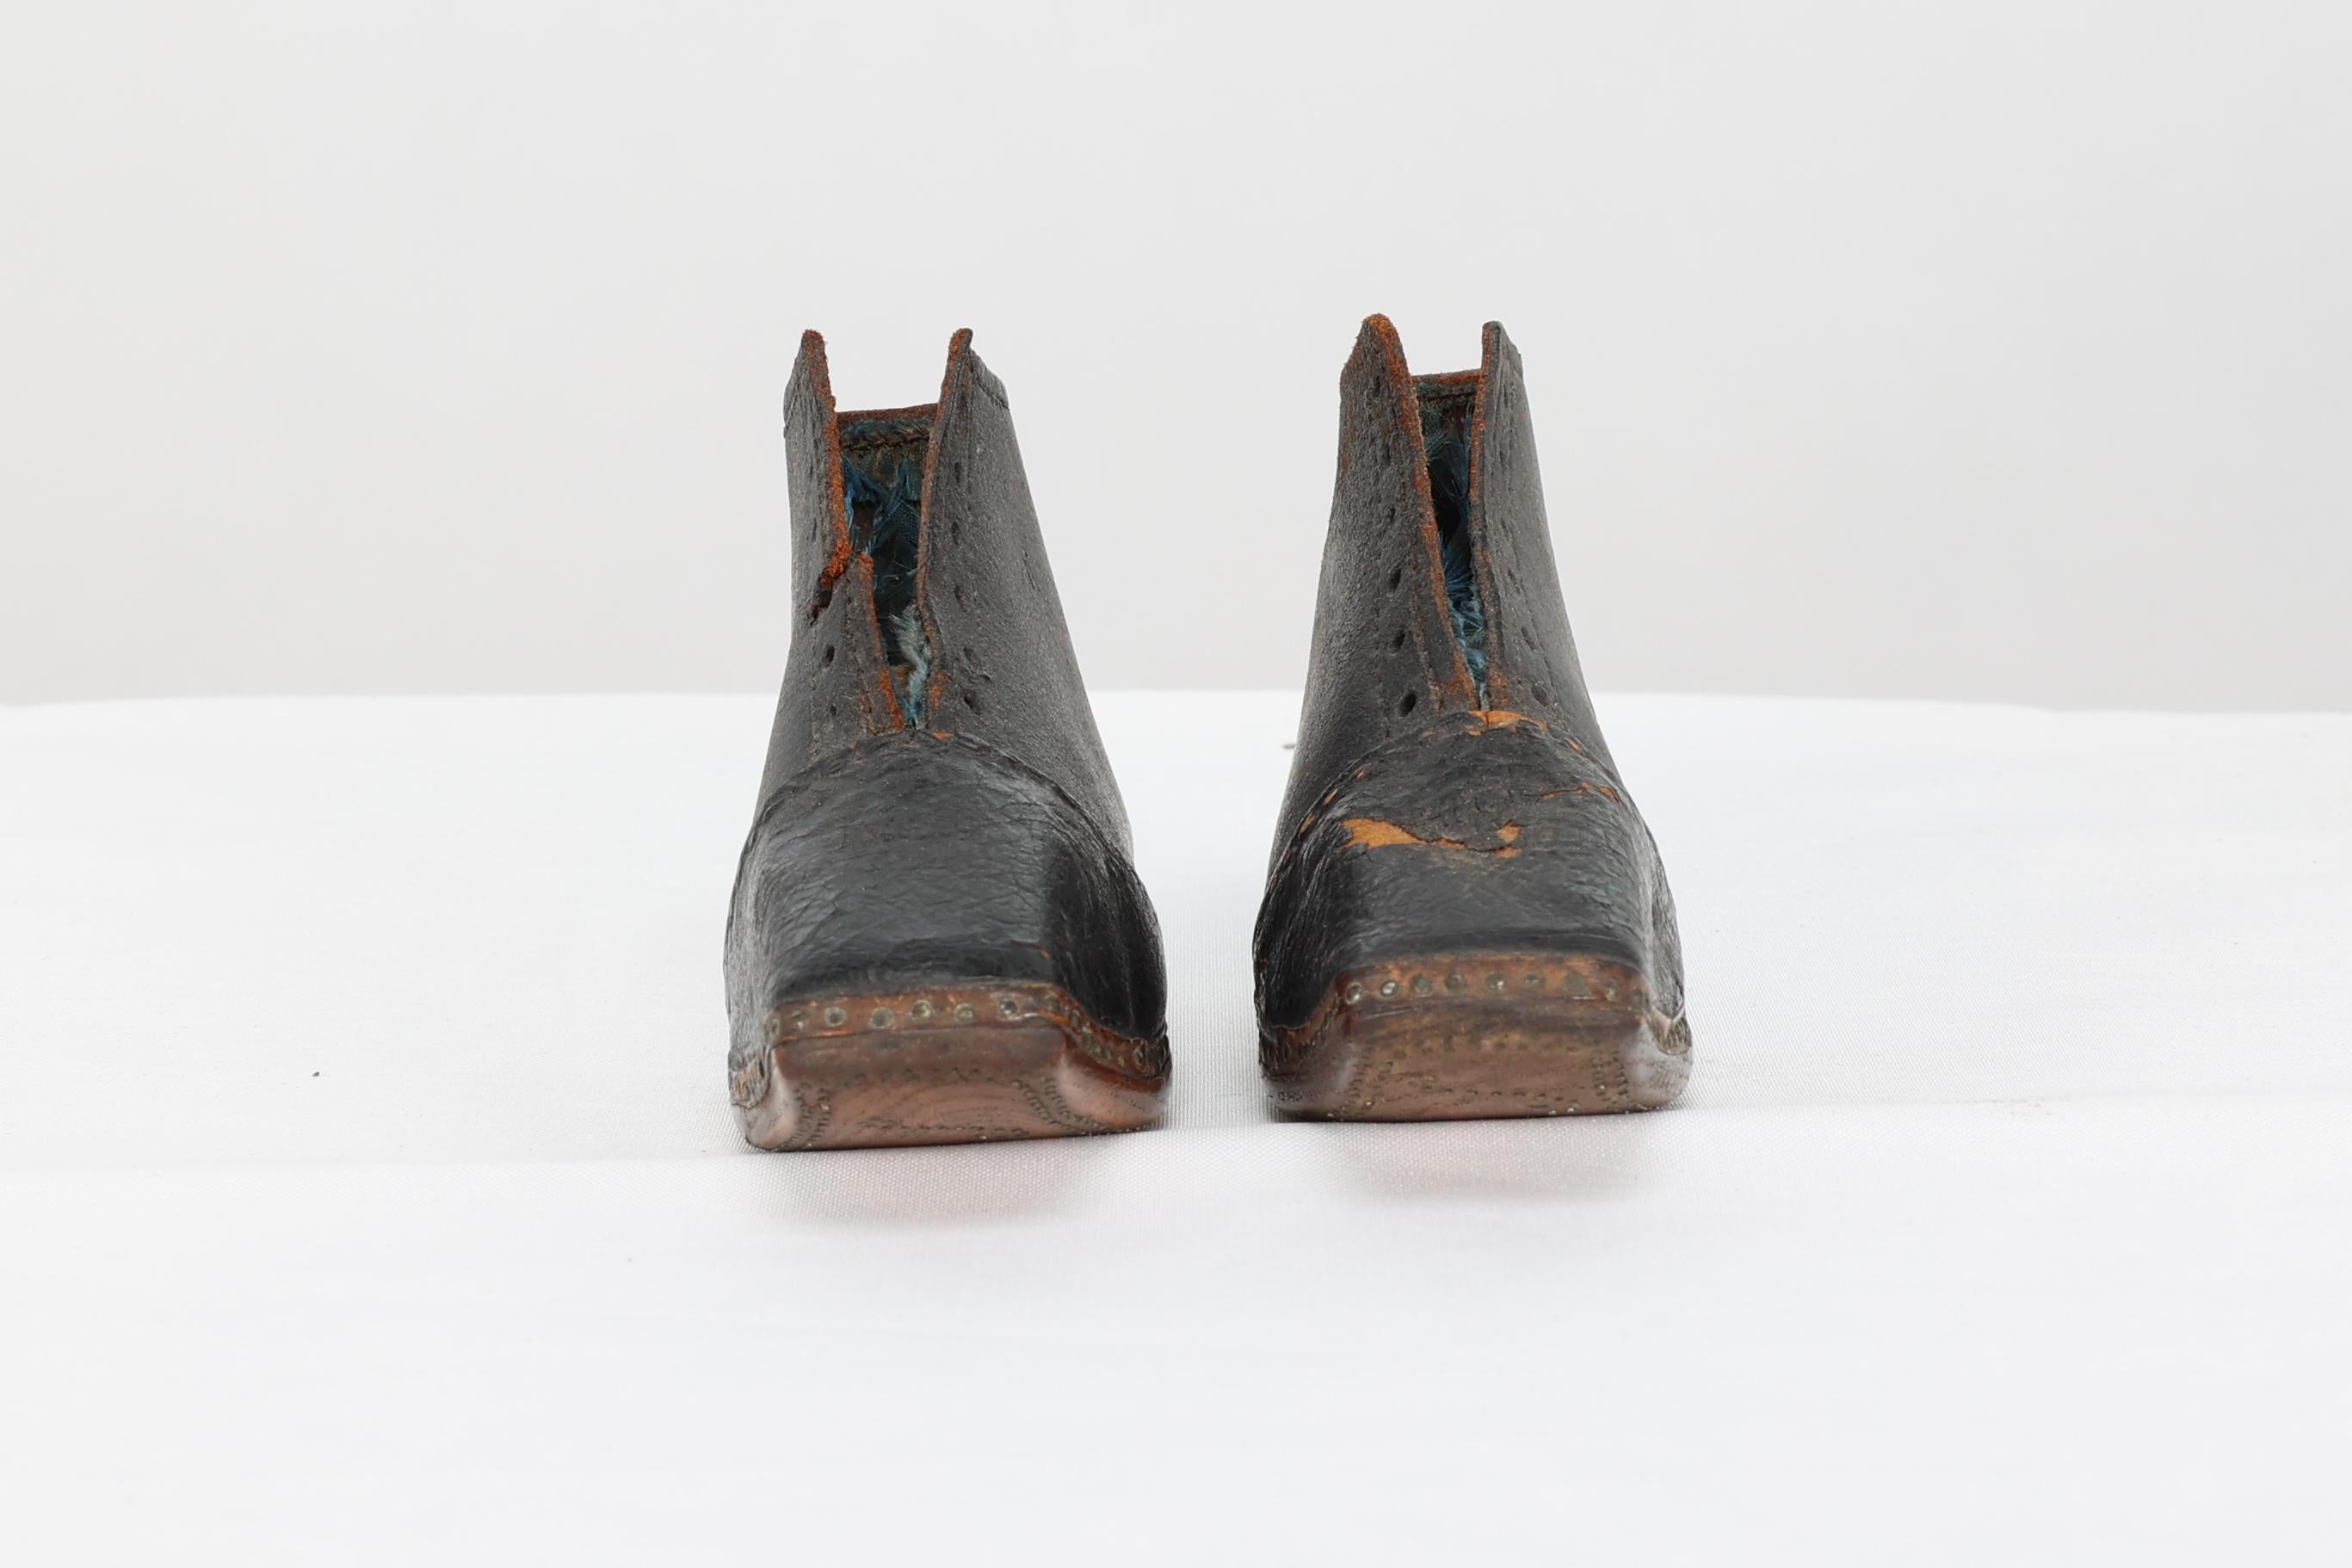 A perfect almost unworn pair of period 19th century hand made leather baby shoes.
